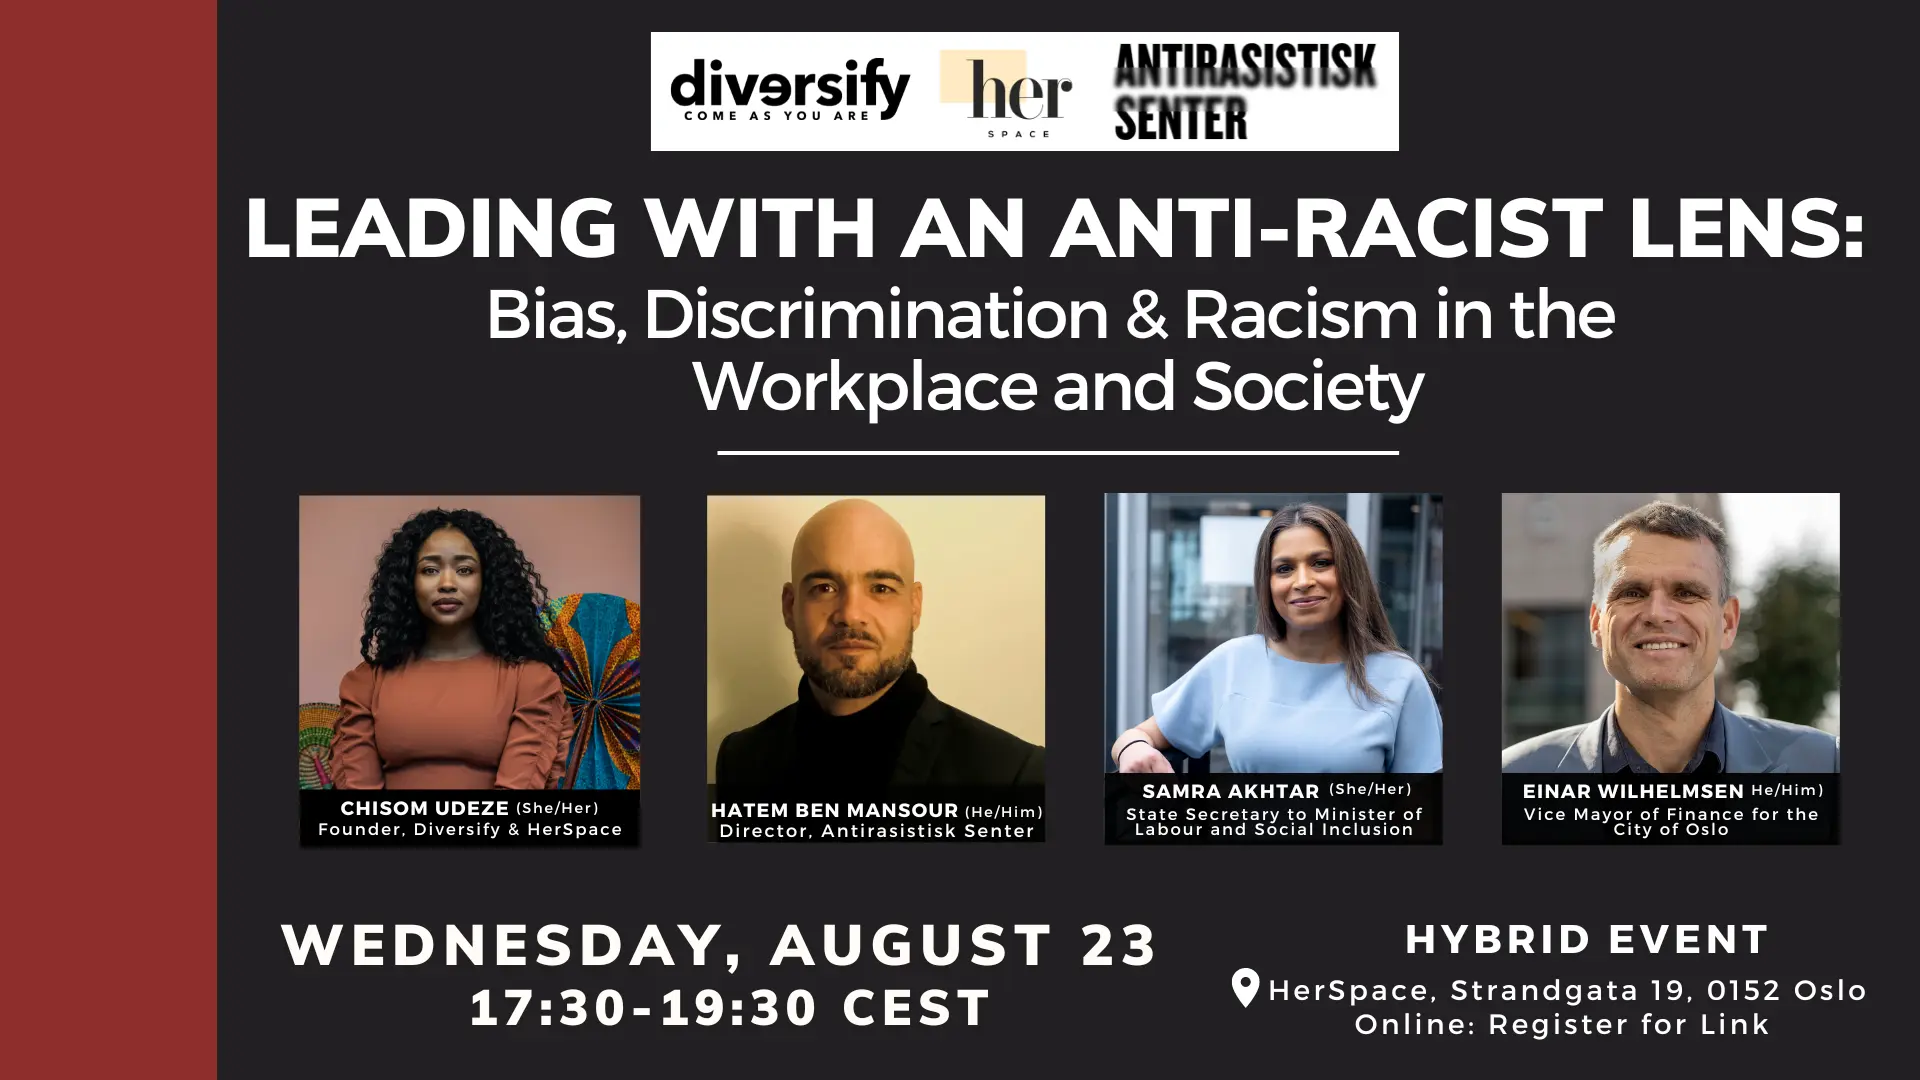 A poster for an event on Leading With A Anti-Racist Lens to be held on Wednesday, August 23 at 17.30 at HerSpace